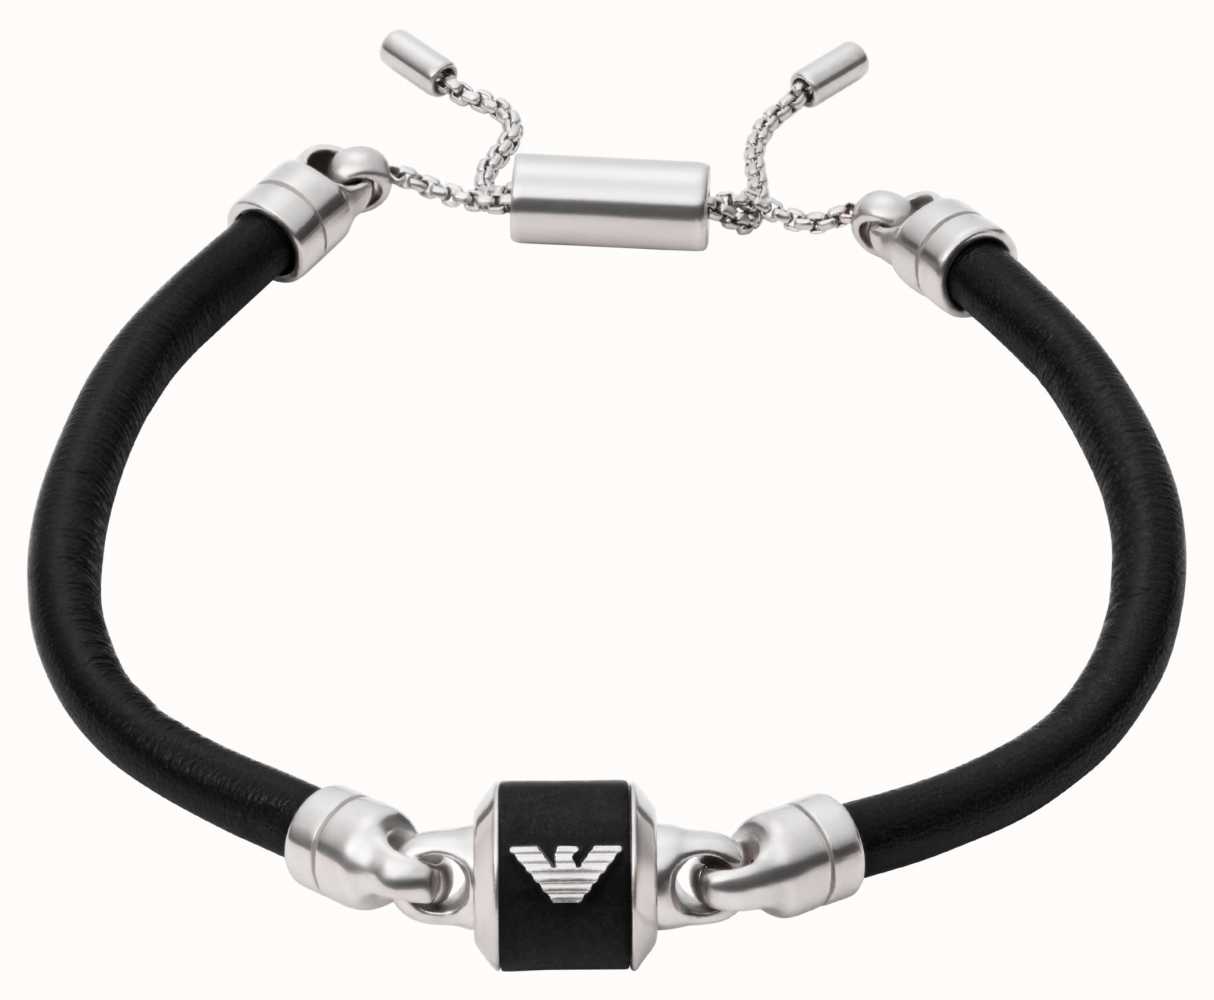 Emporio Armani Men's Black Leather And Stainless Steel Bracelet